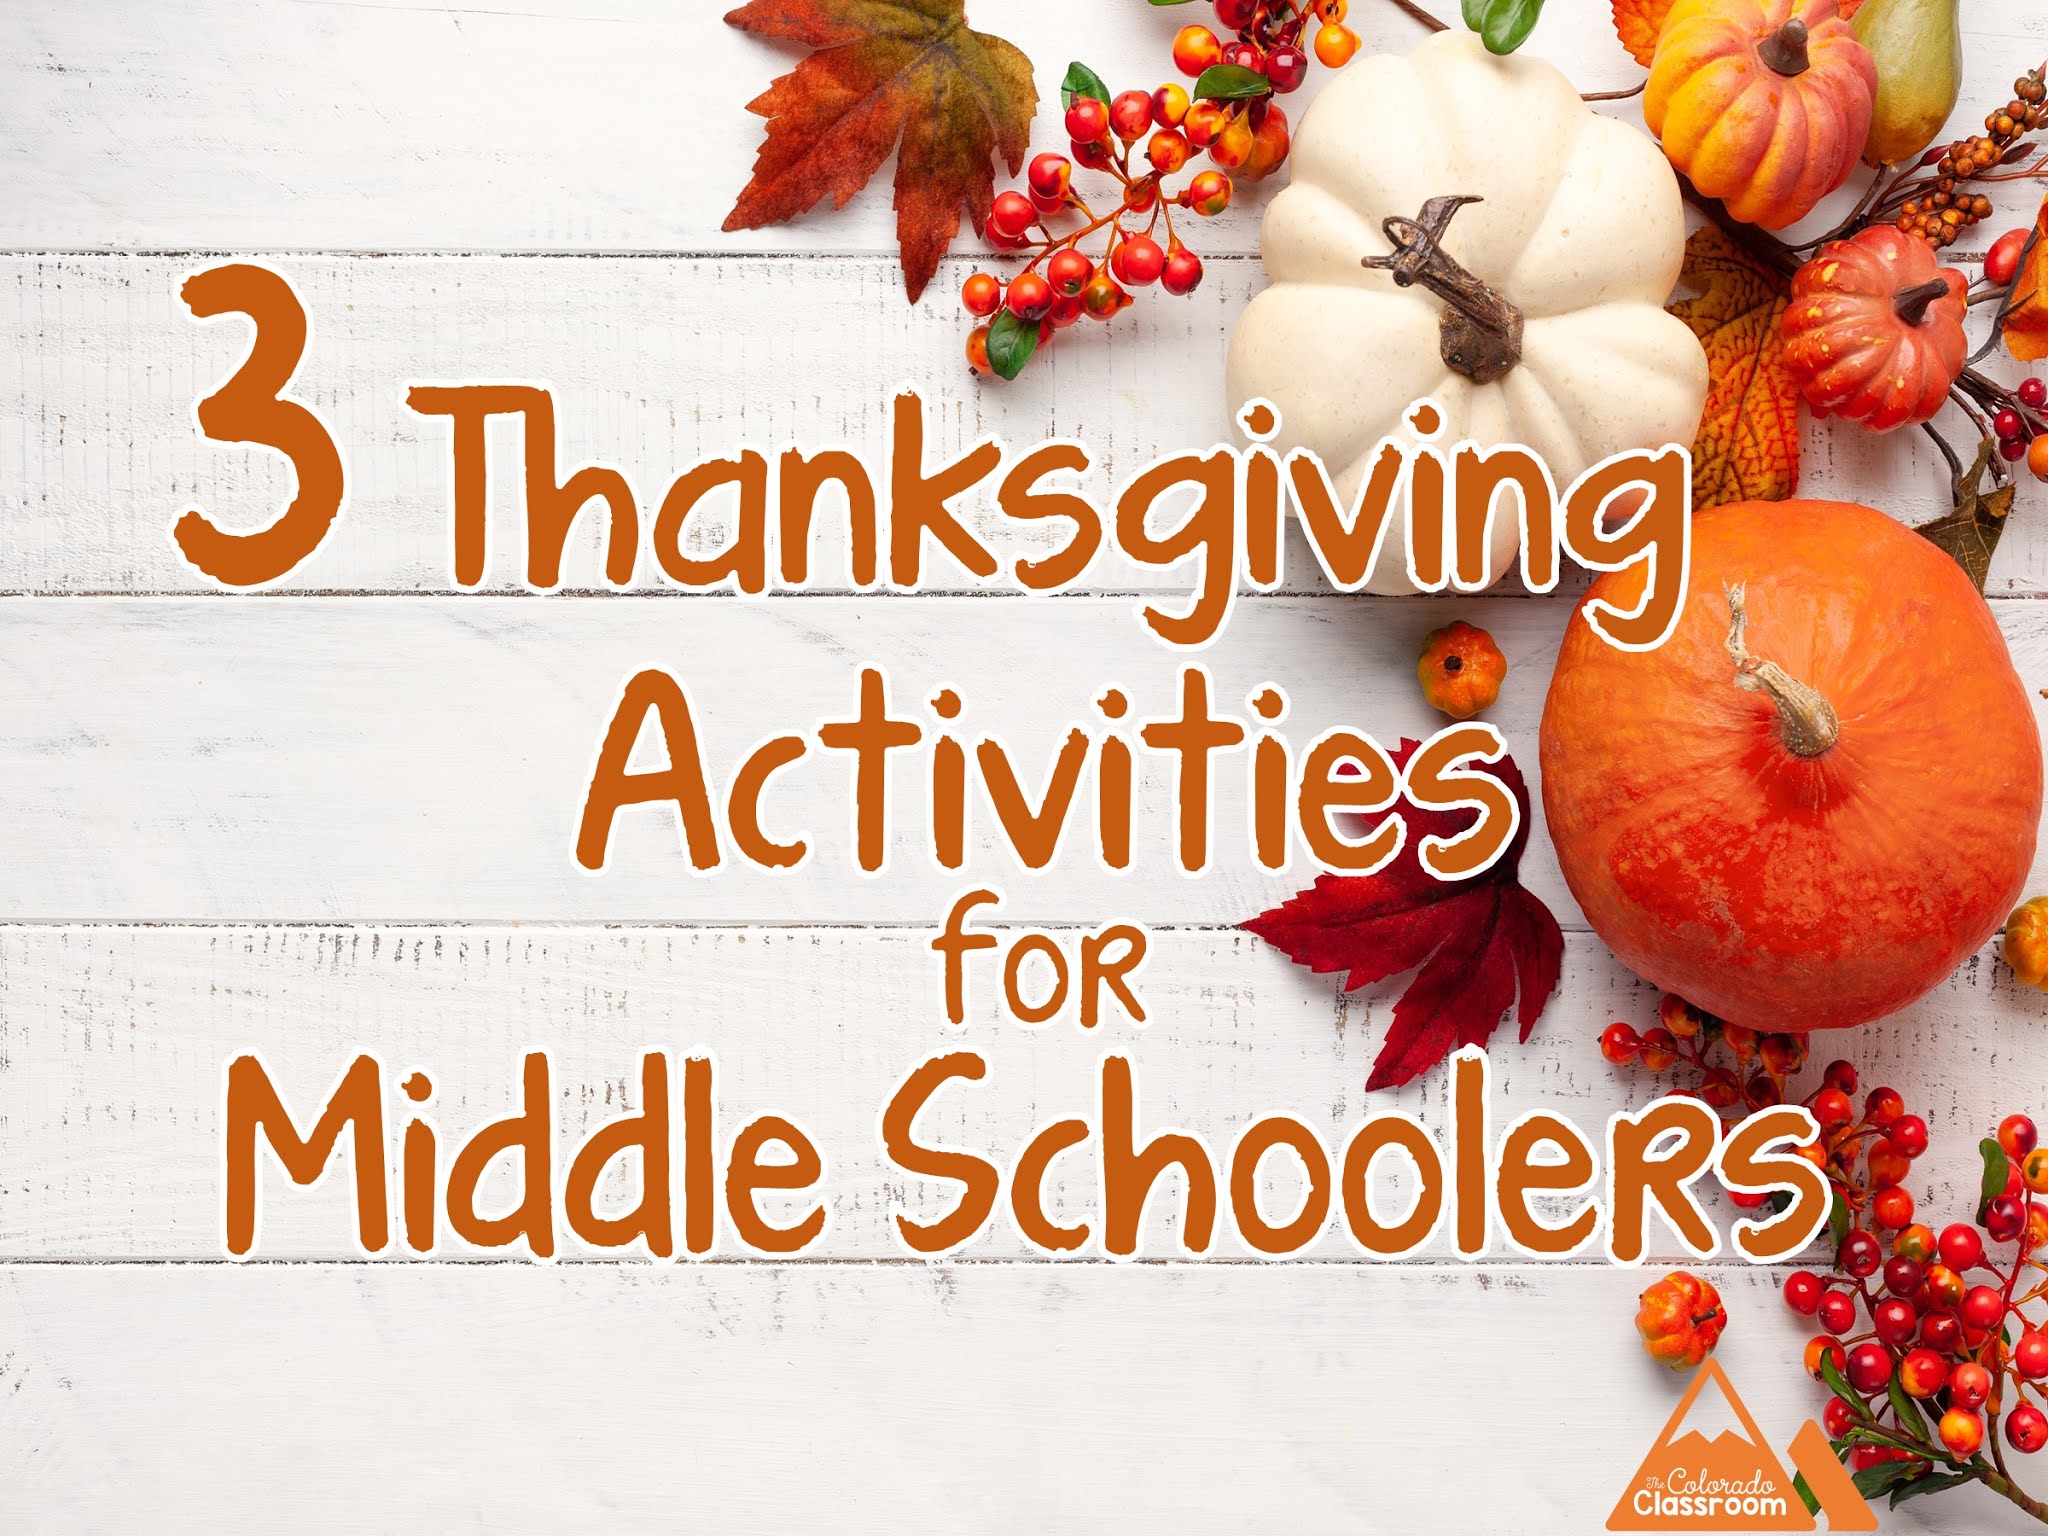 3-thanksgiving-activities-for-middle-schoolers-the-colorado-classroom